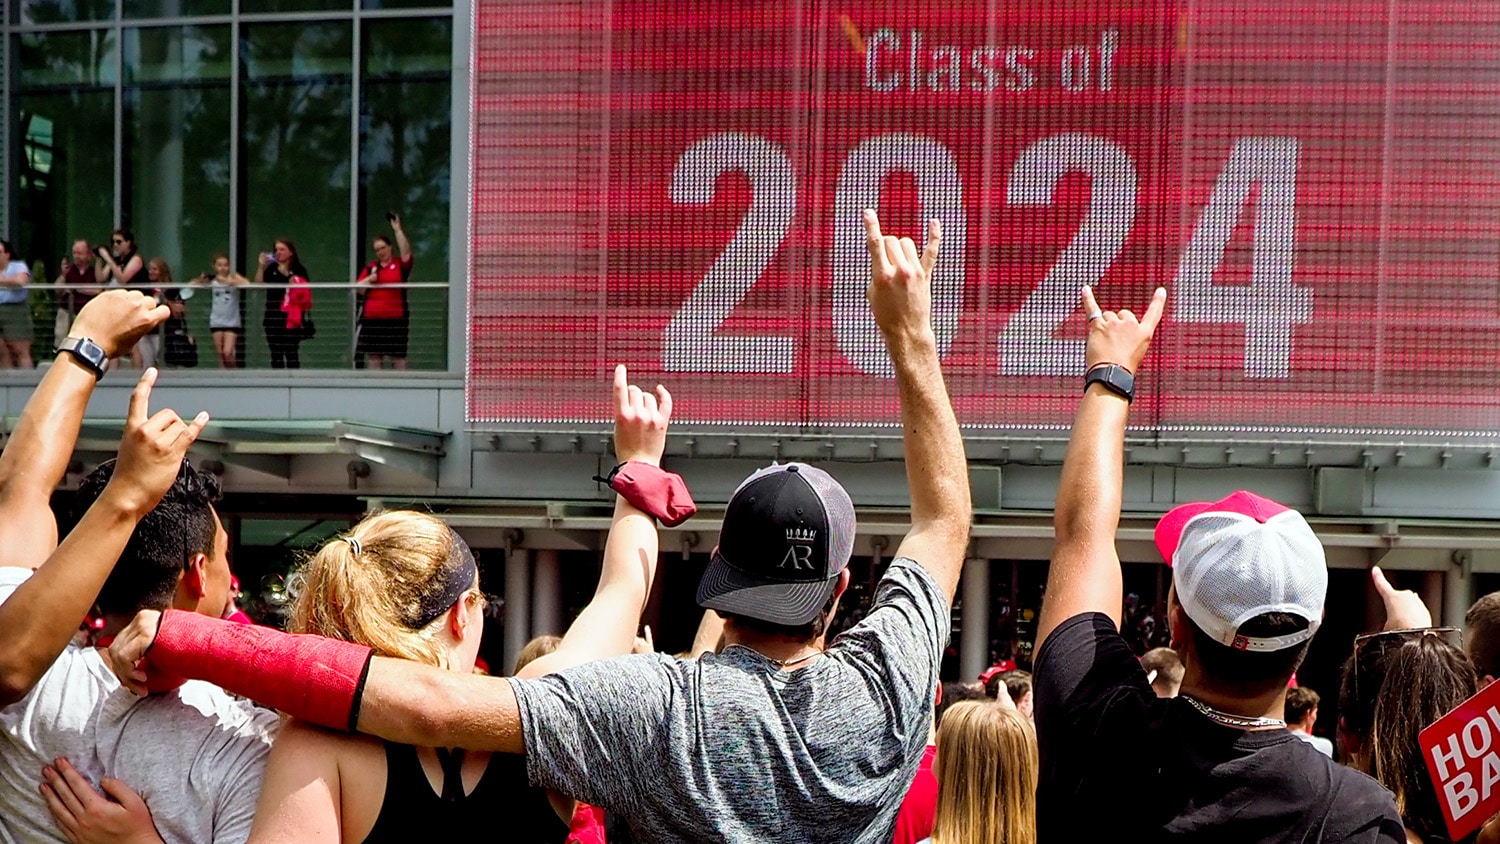 Incoming NC State students make wolf ears gestures in front of a screen reading class of 2024.